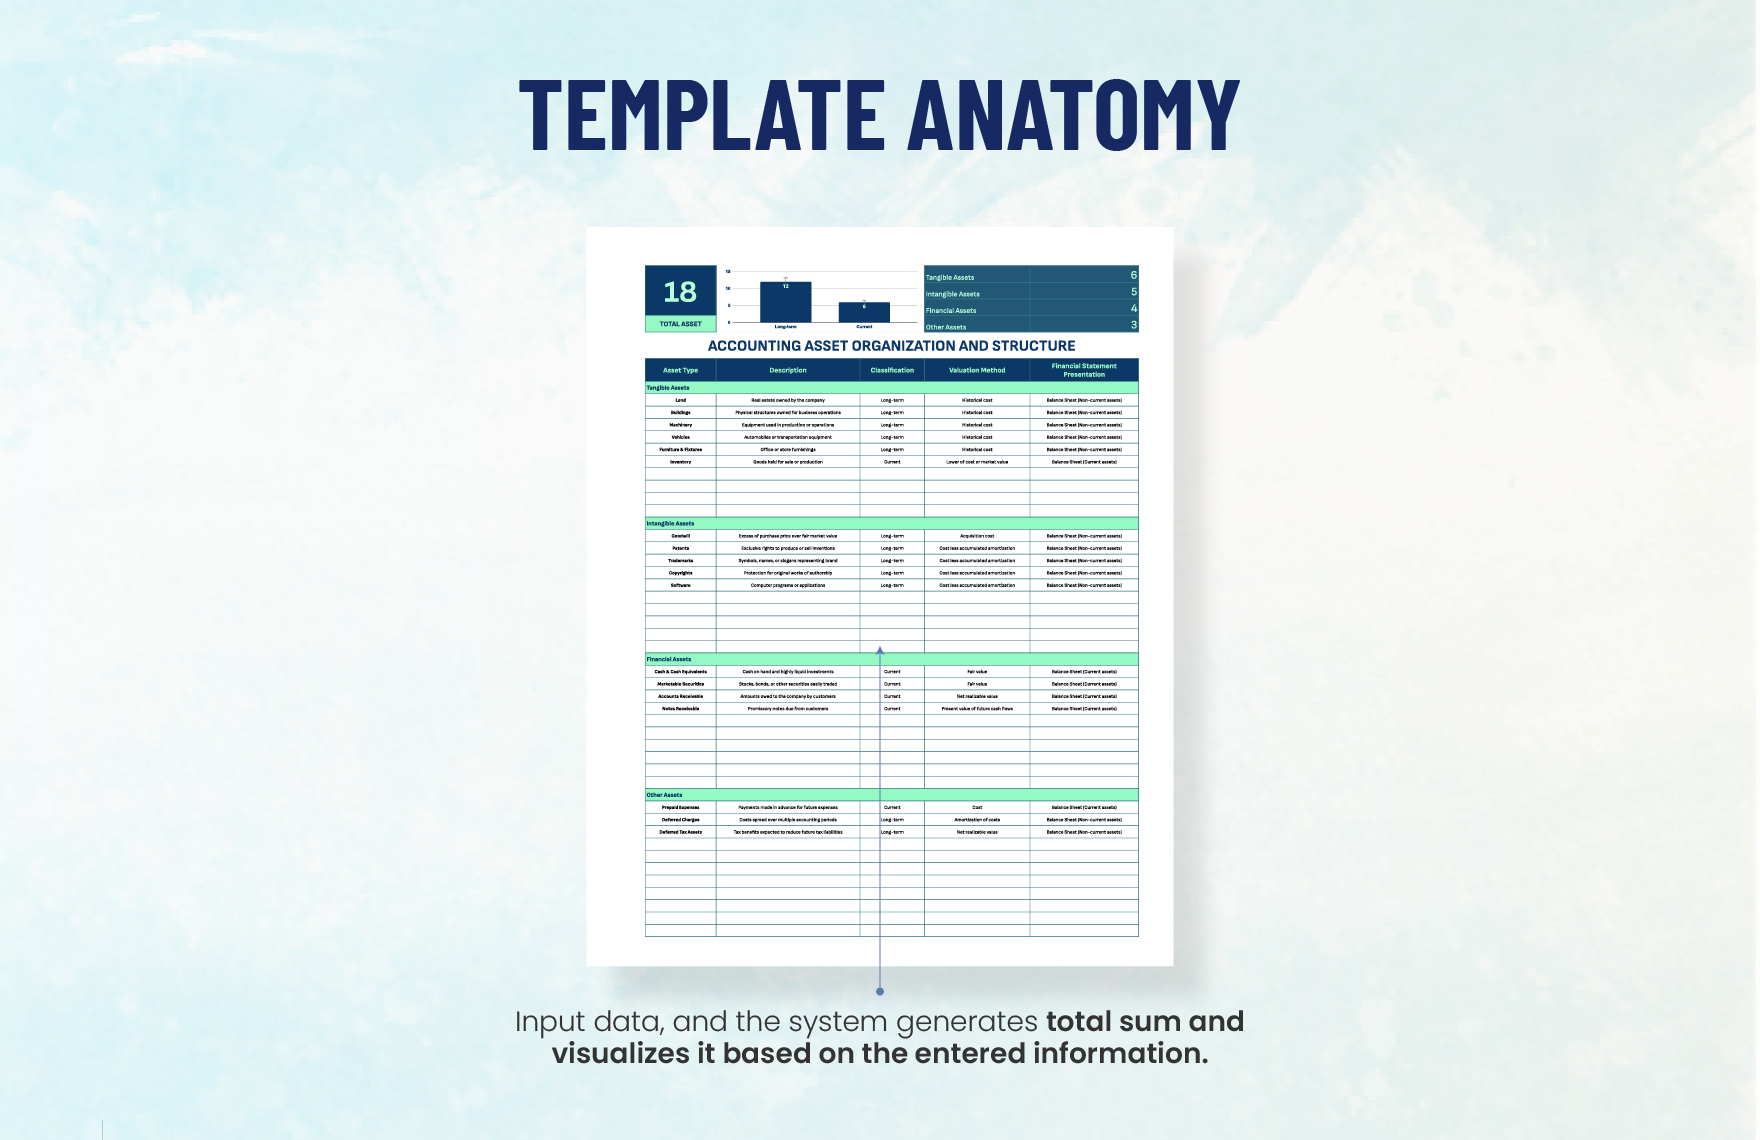 Accounting Asset Organization and Structure Template